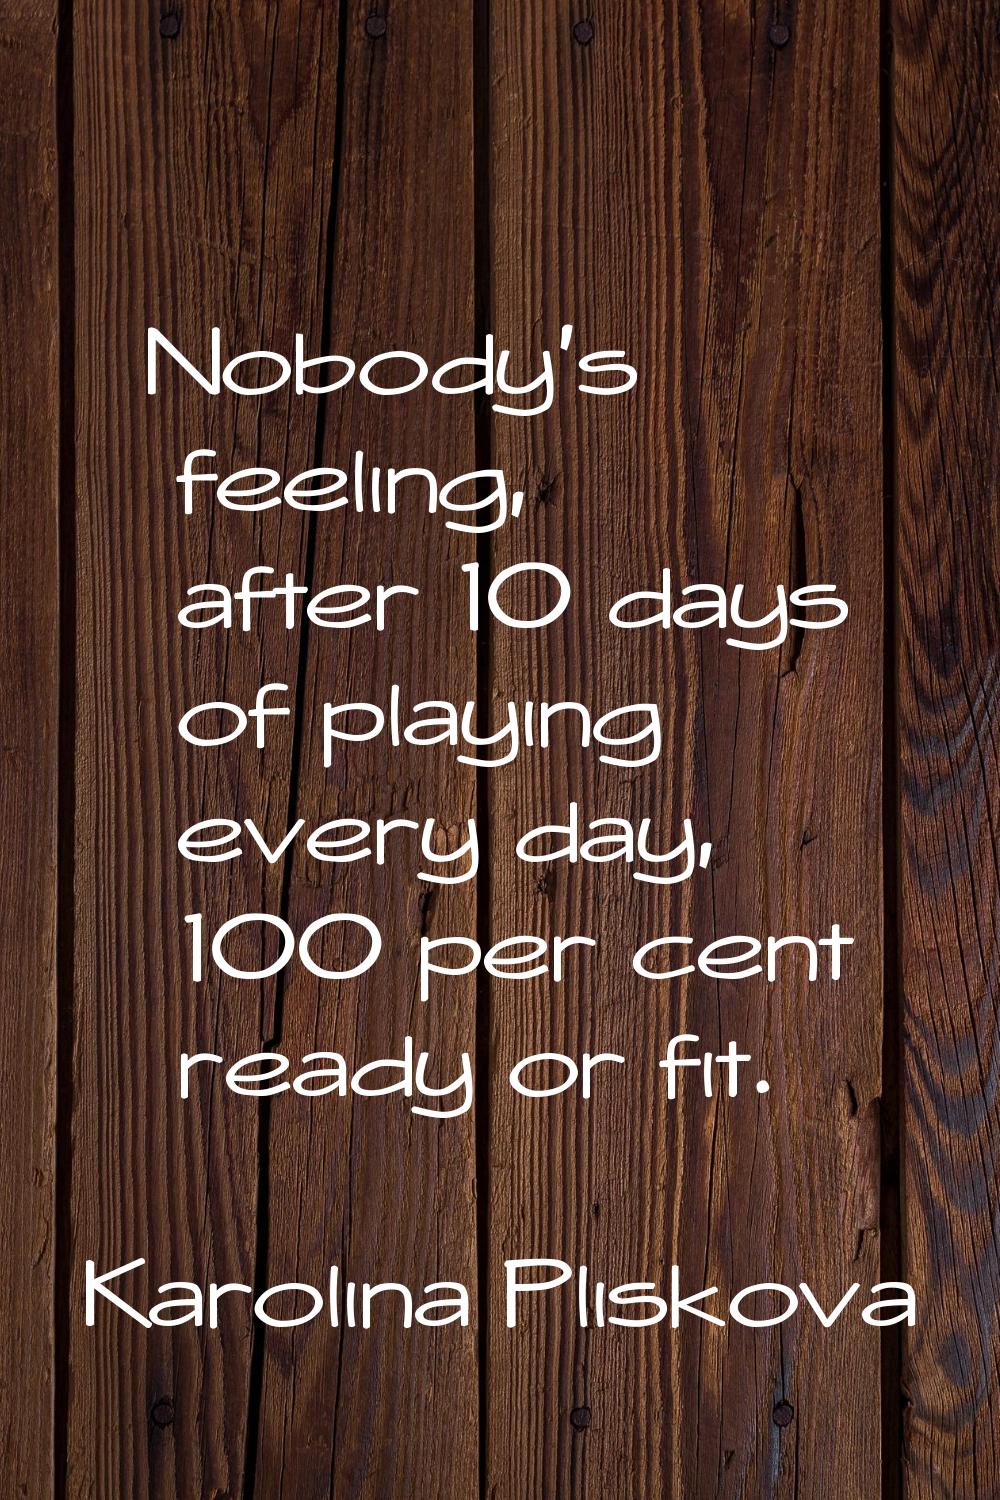 Nobody's feeling, after 10 days of playing every day, 100 per cent ready or fit.